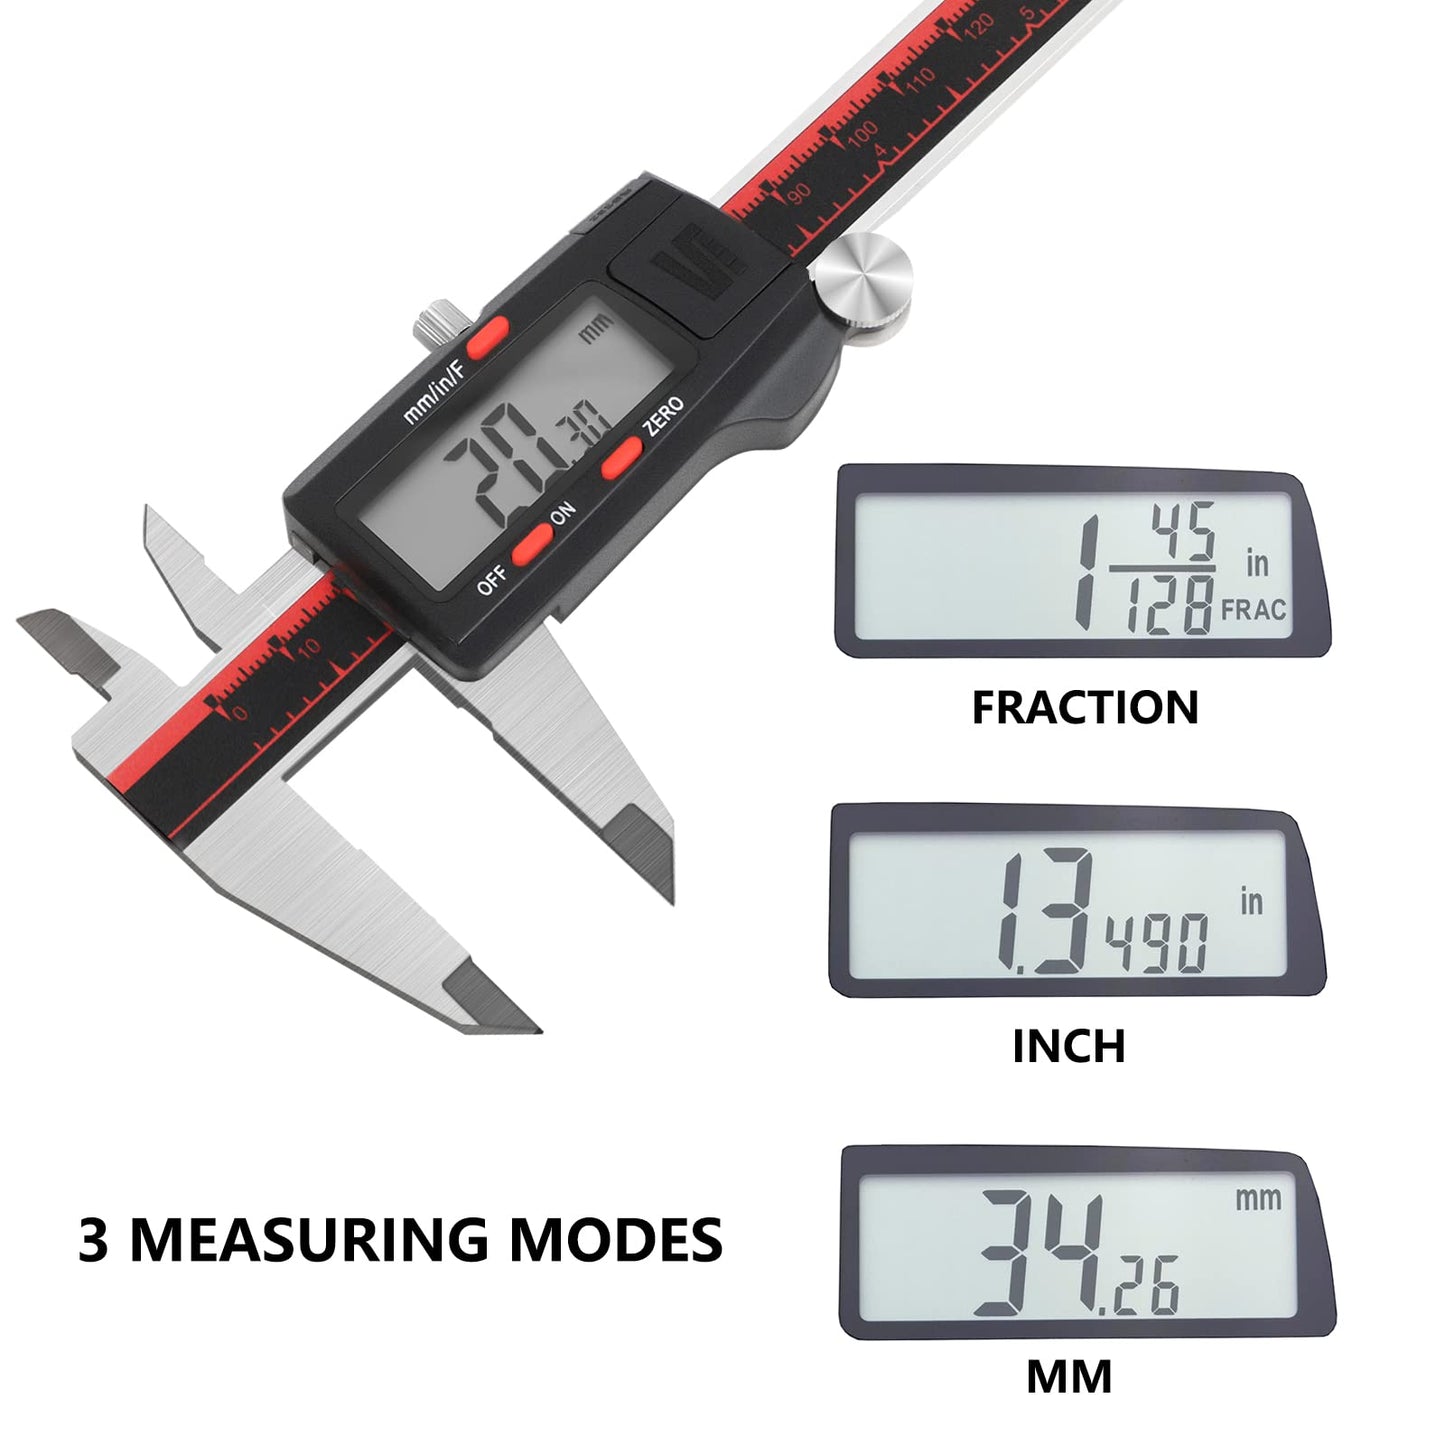 VINCA Digital Caliper, DCLA-0605 0-6 Inch/150mm, Inch/Millimeter/Fraction Conversion, Stainless Steel, Large LCD Screen